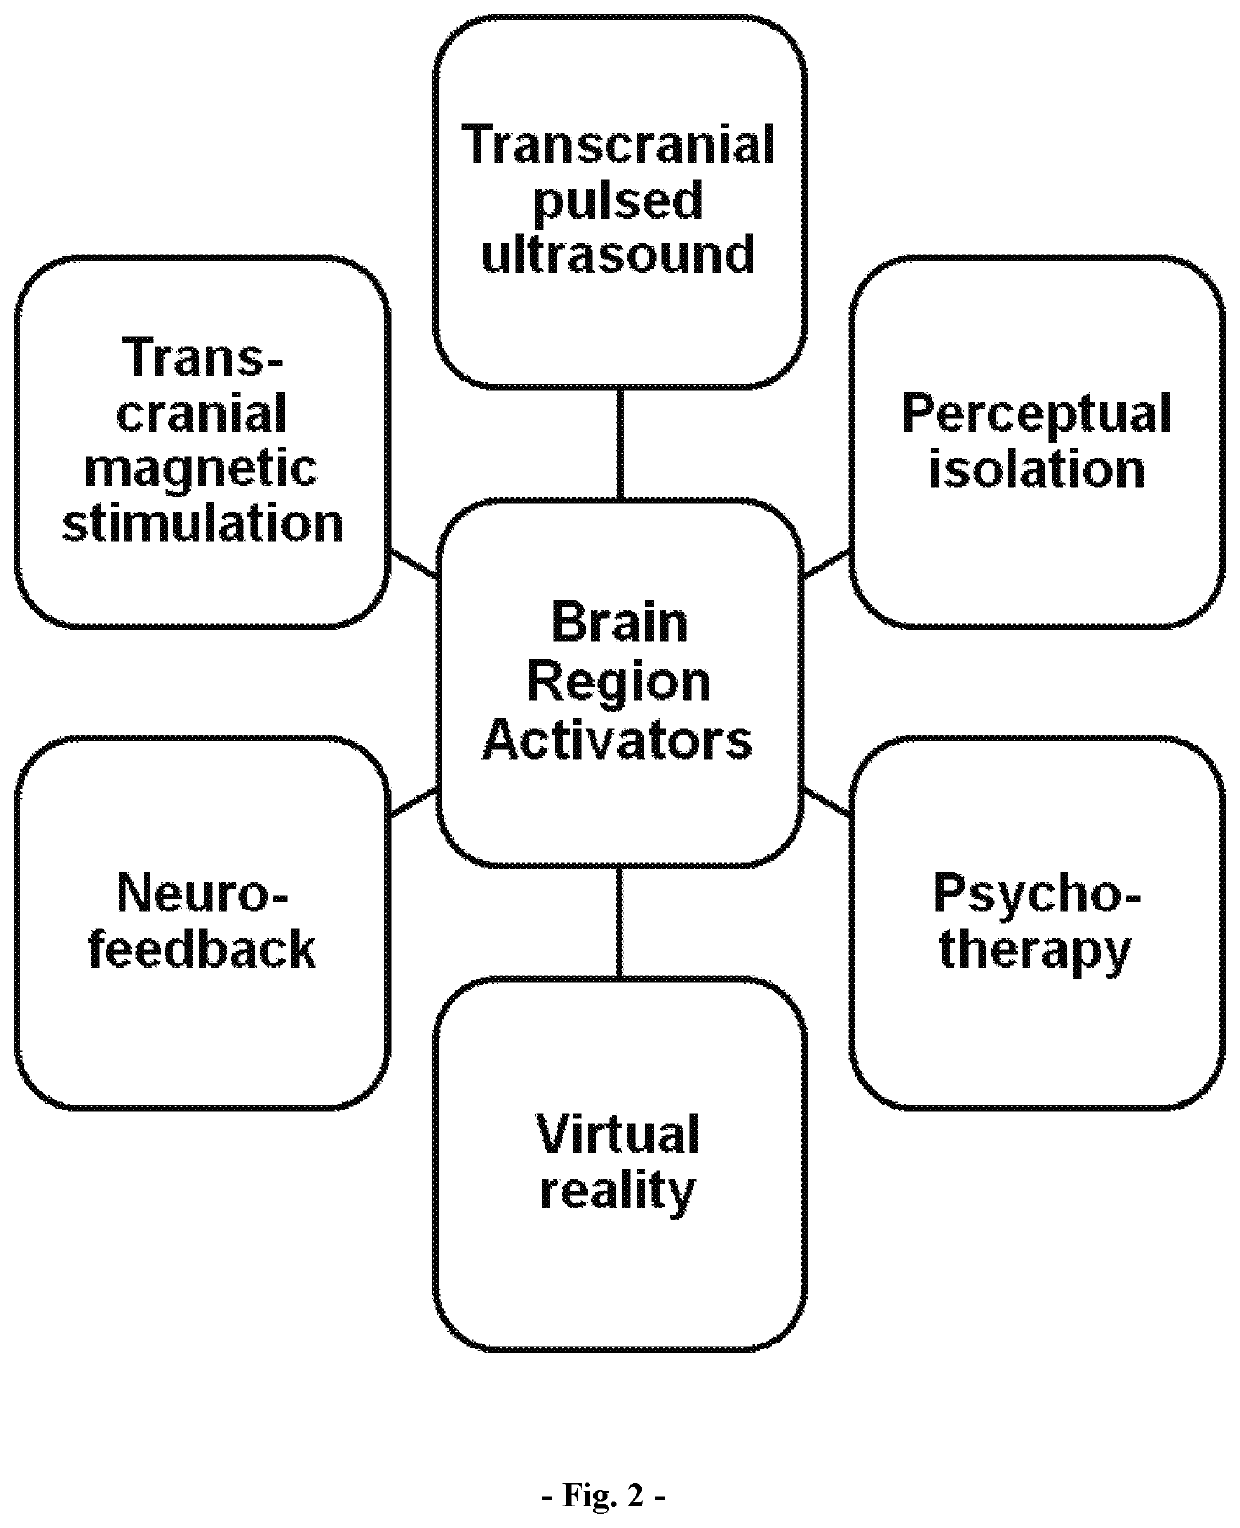 Method for treating neurological conditions and improving human cognition